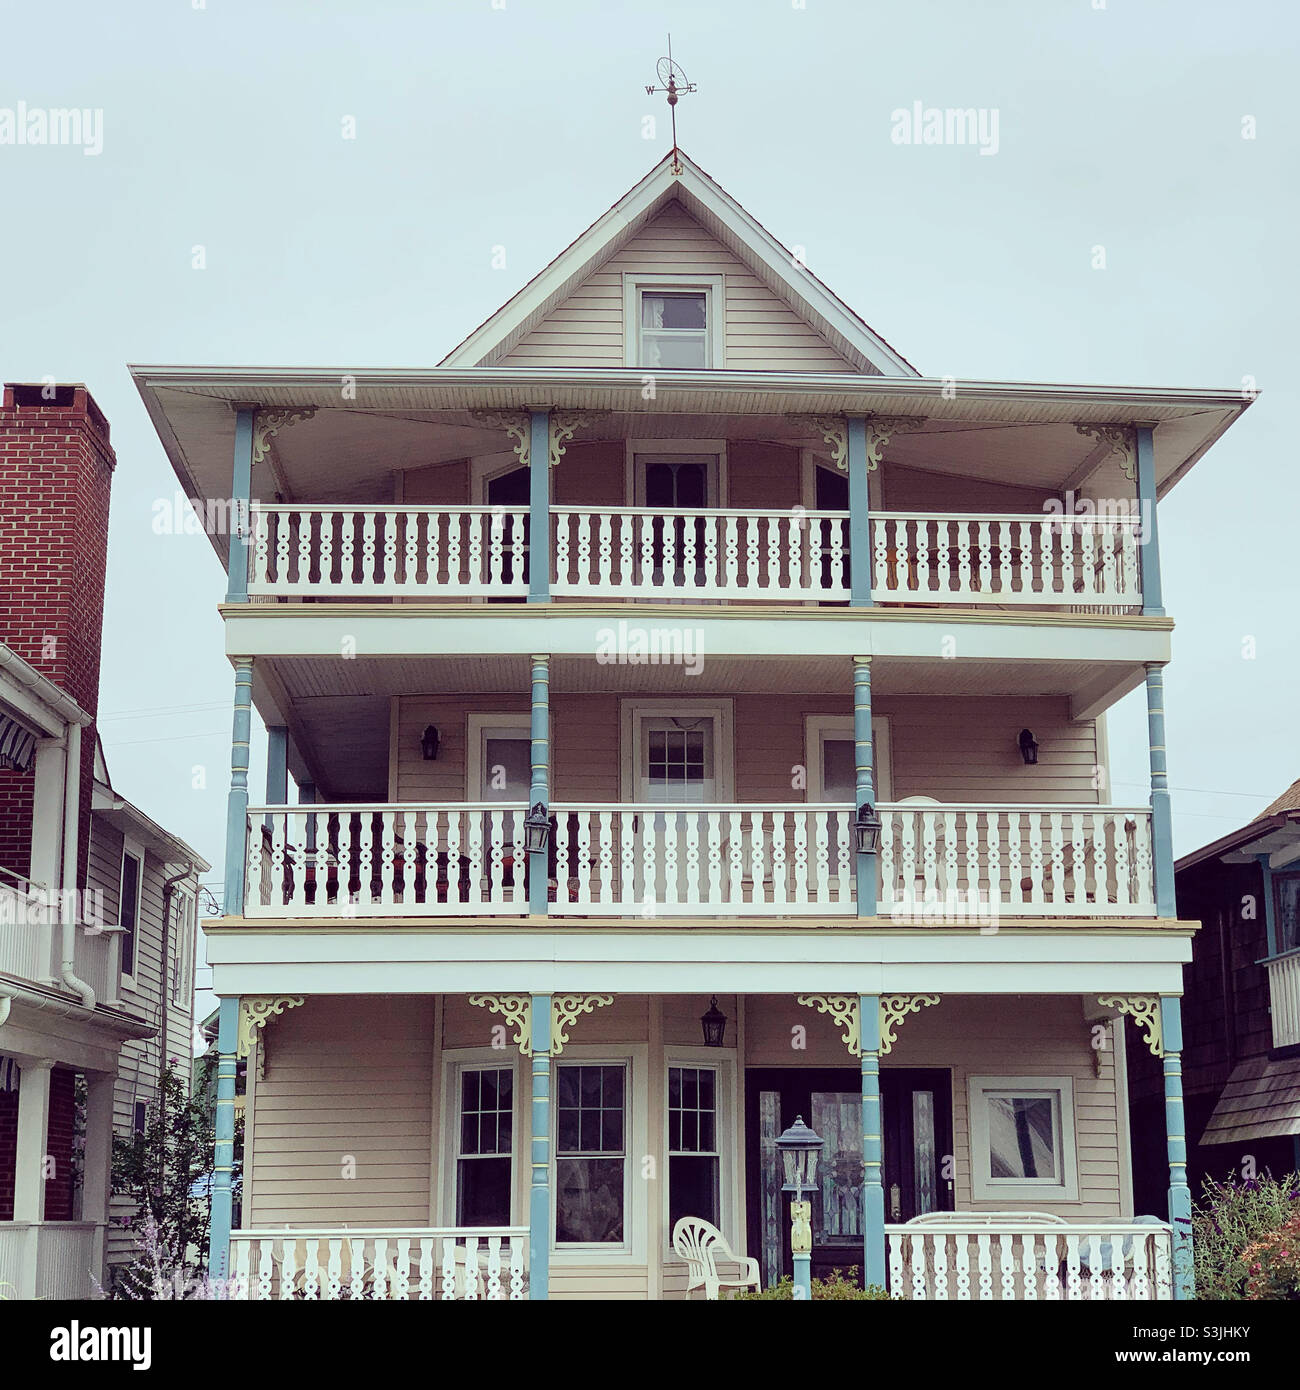 August 2021, ein Haus in Ocean Grove, Neptune Township, Monmouth County, New Jersey, USA Stockfoto